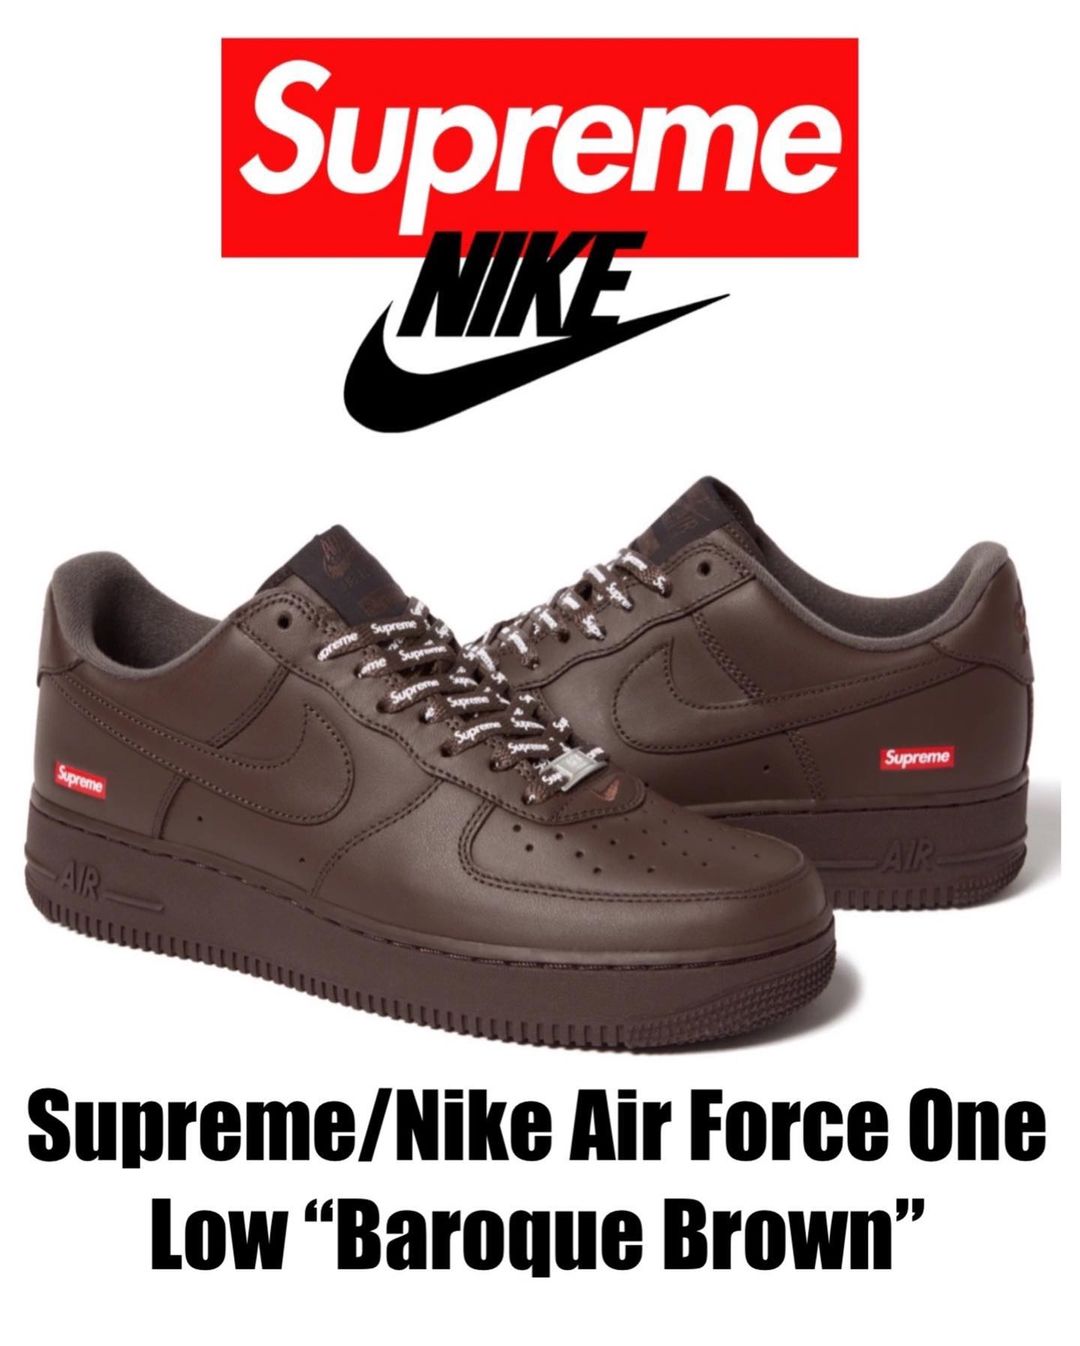 supreme Nike AF1  BROWN即決16万は難しいでしょうか